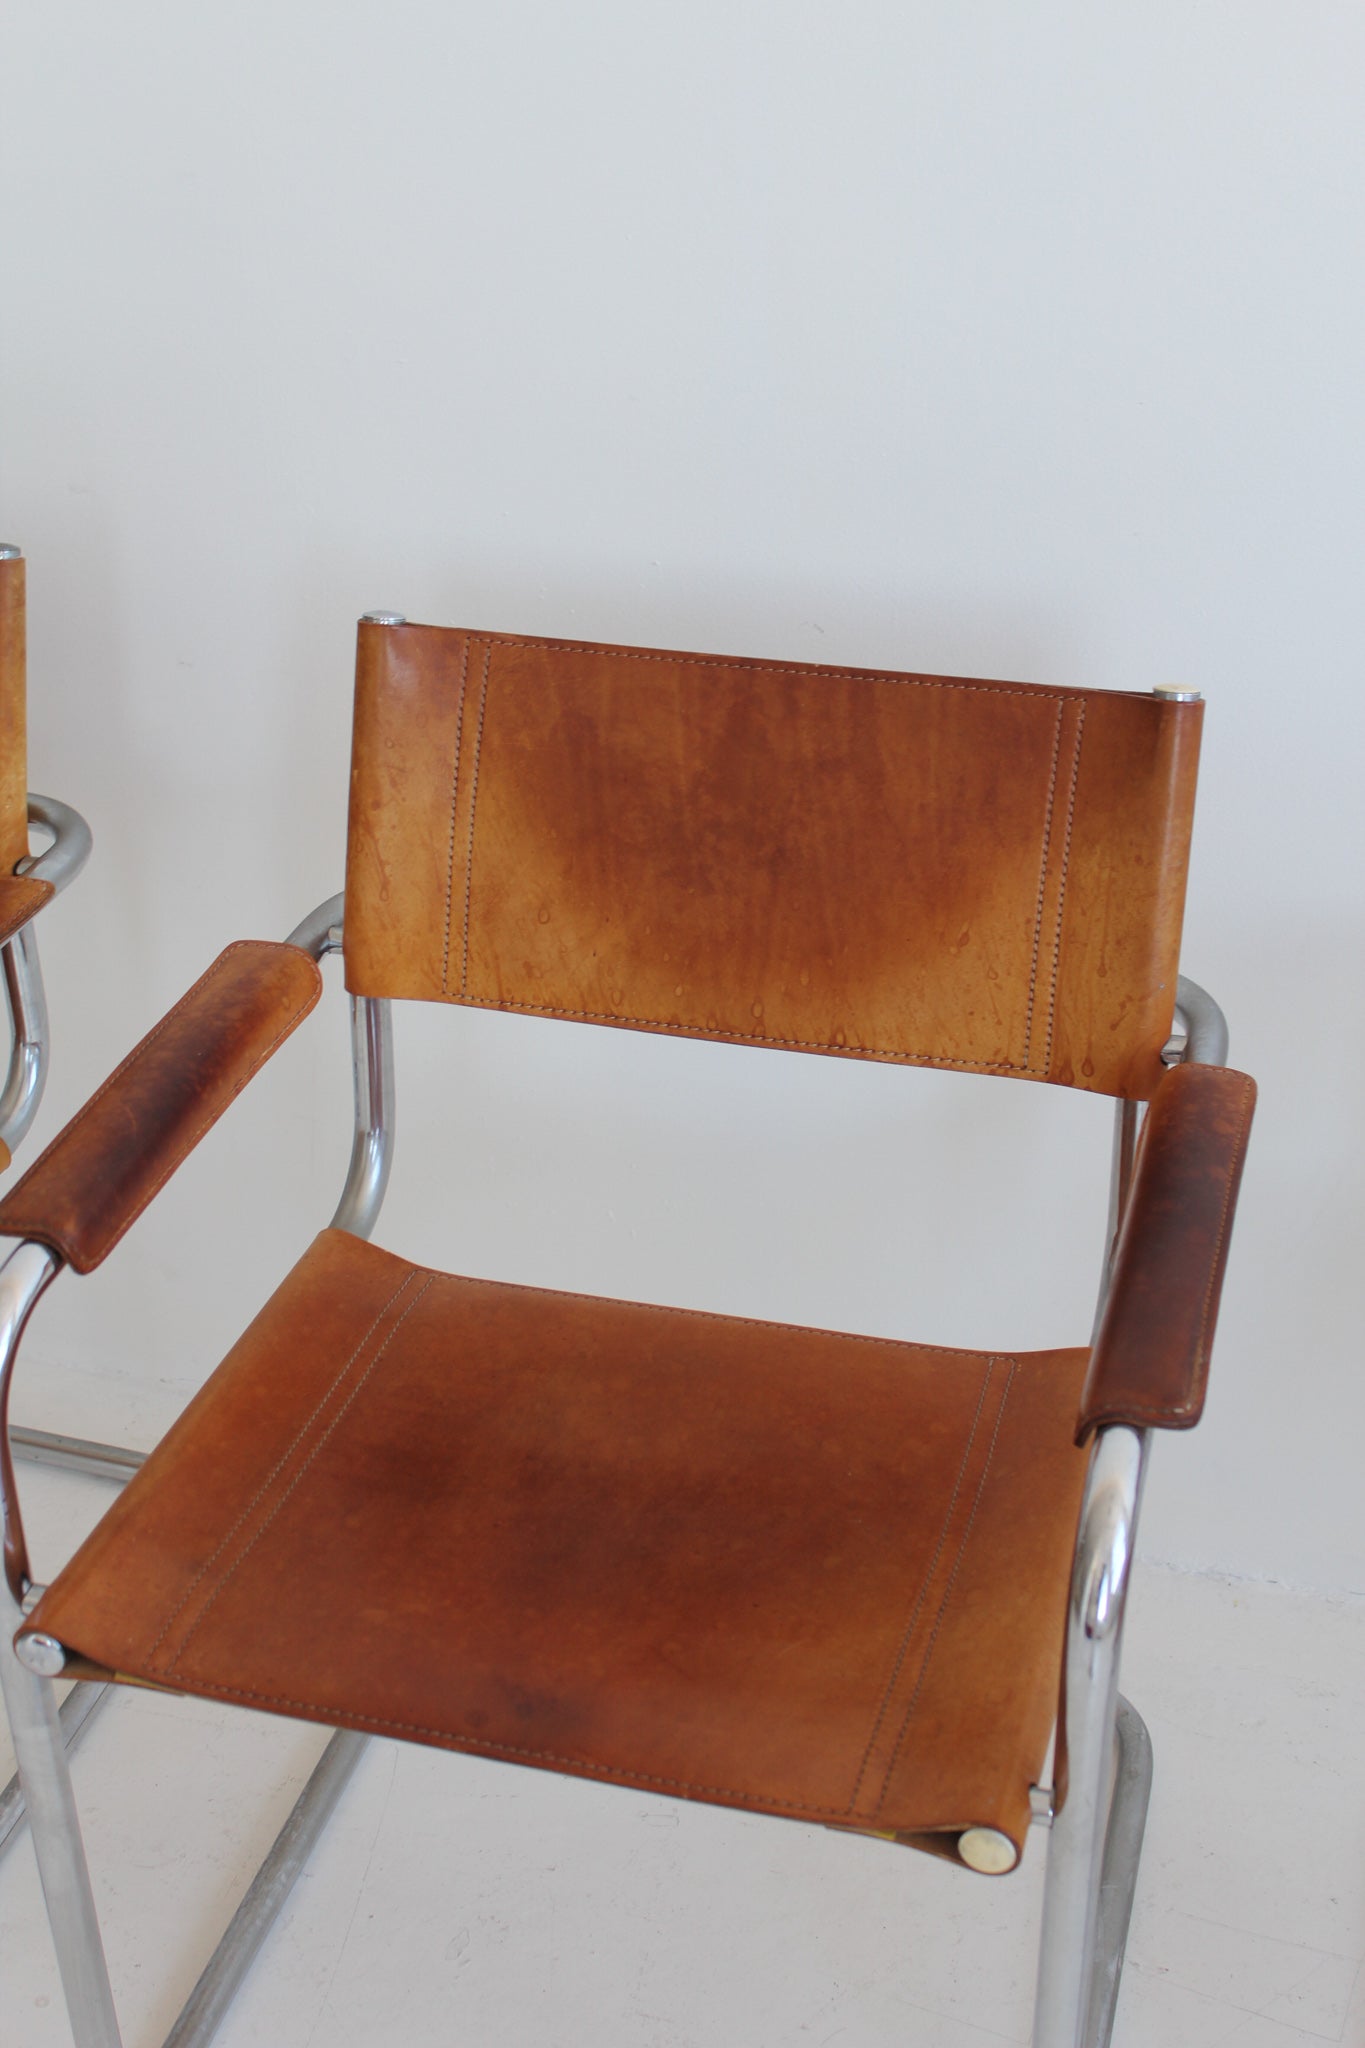 Model S33 armchairs by Mart Stam